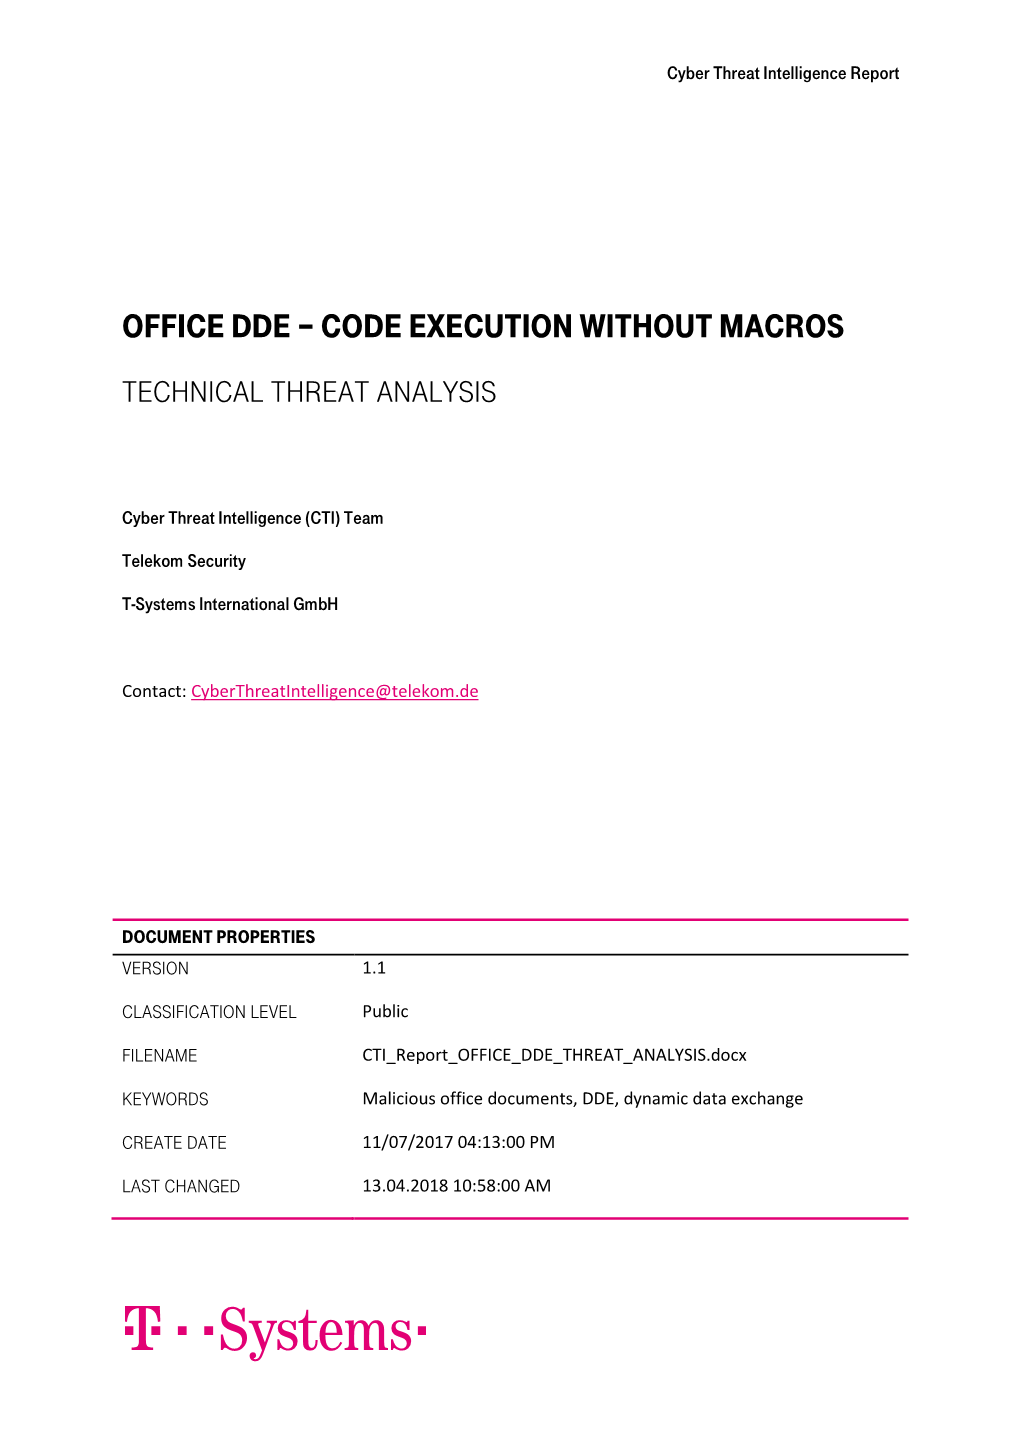 Office DDE – Code Execution Without Macros